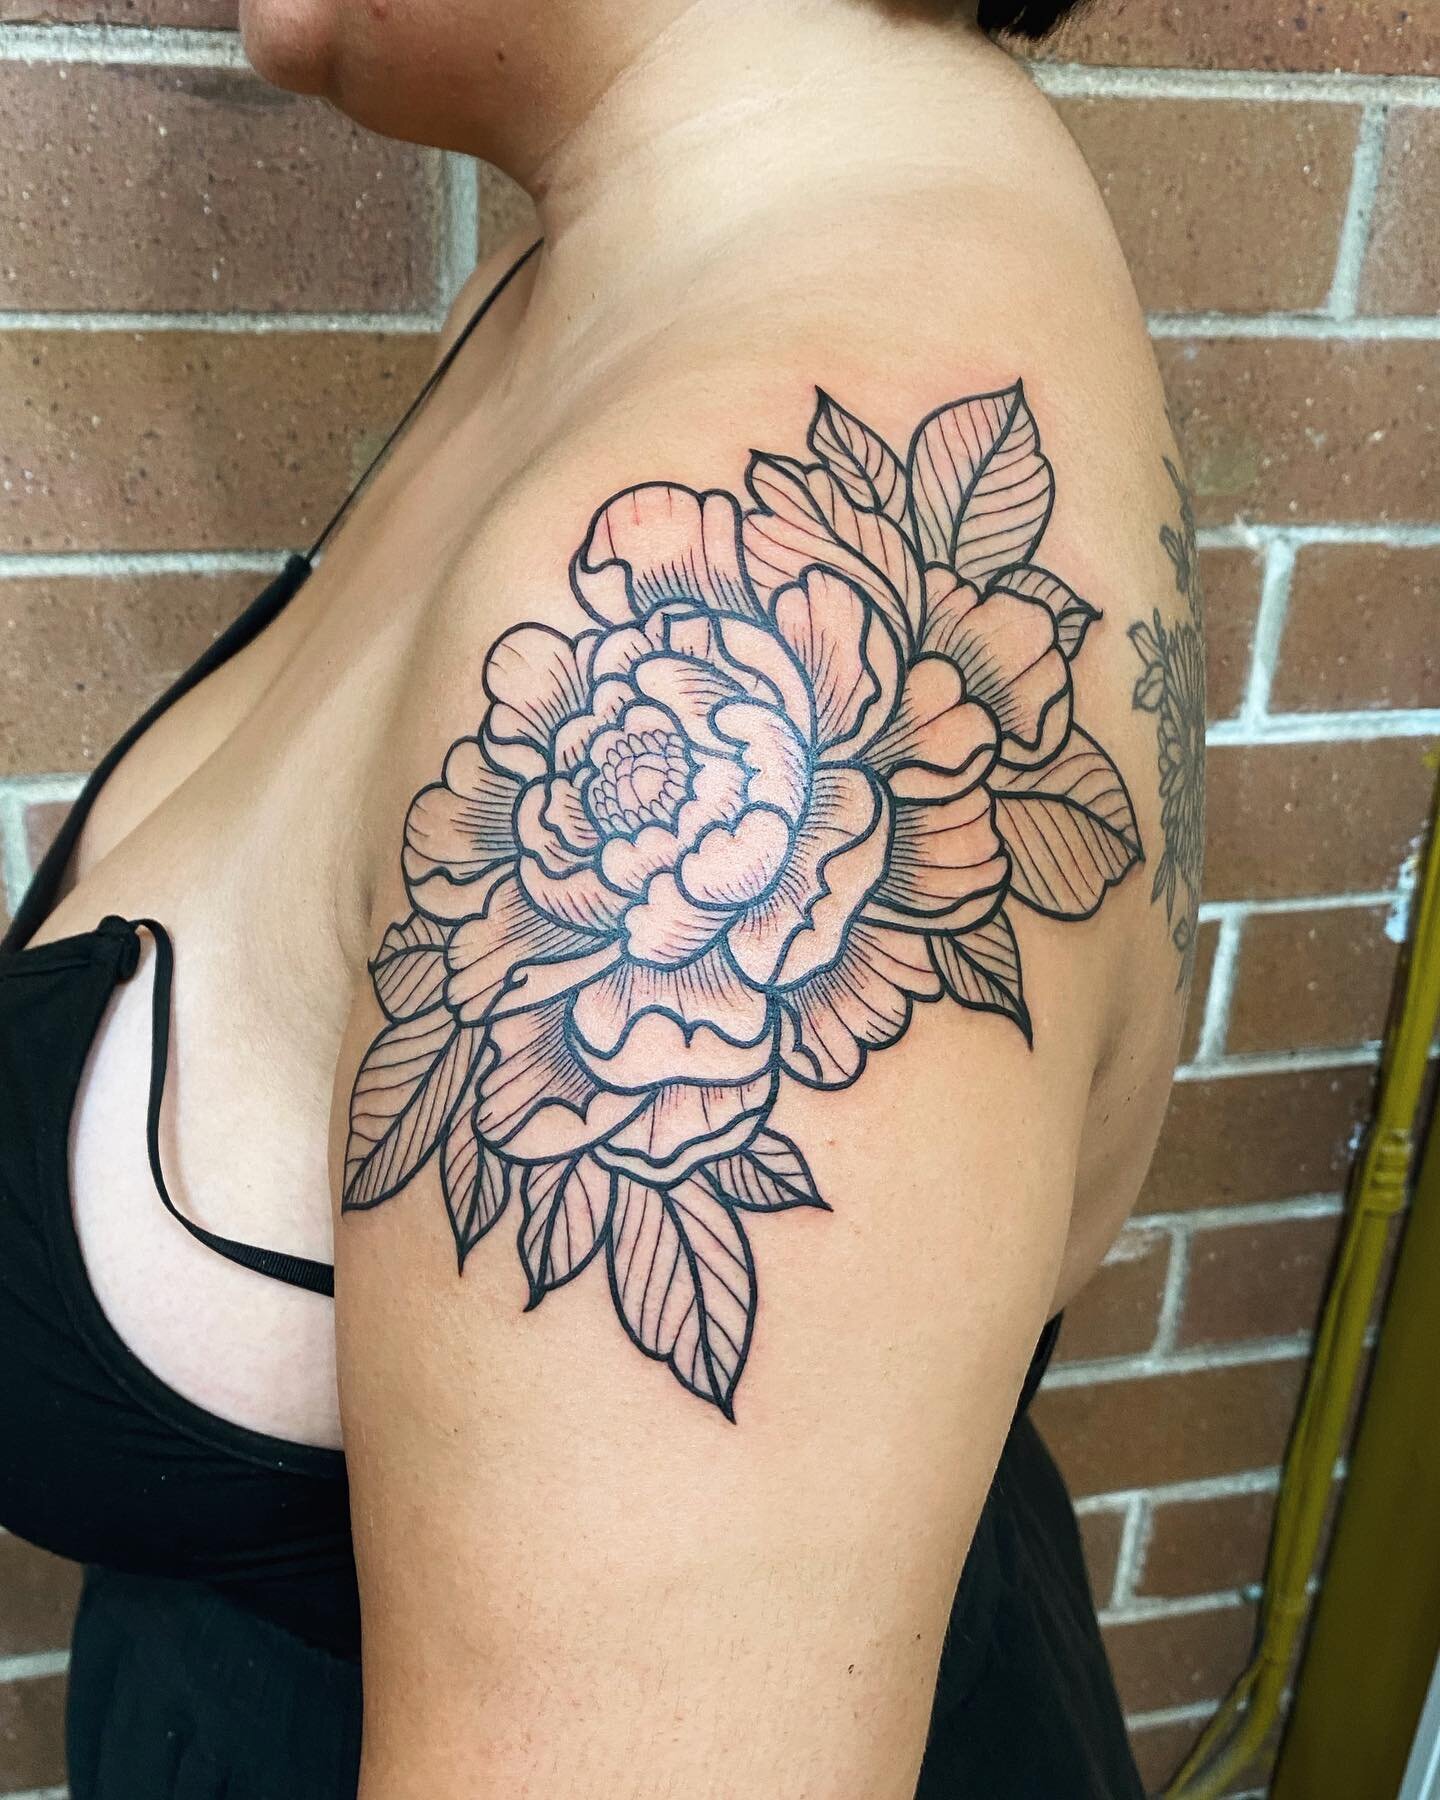 peony shoulder cap for mirachelle , thanks for coming back! 🌸 

done at @familytattoo